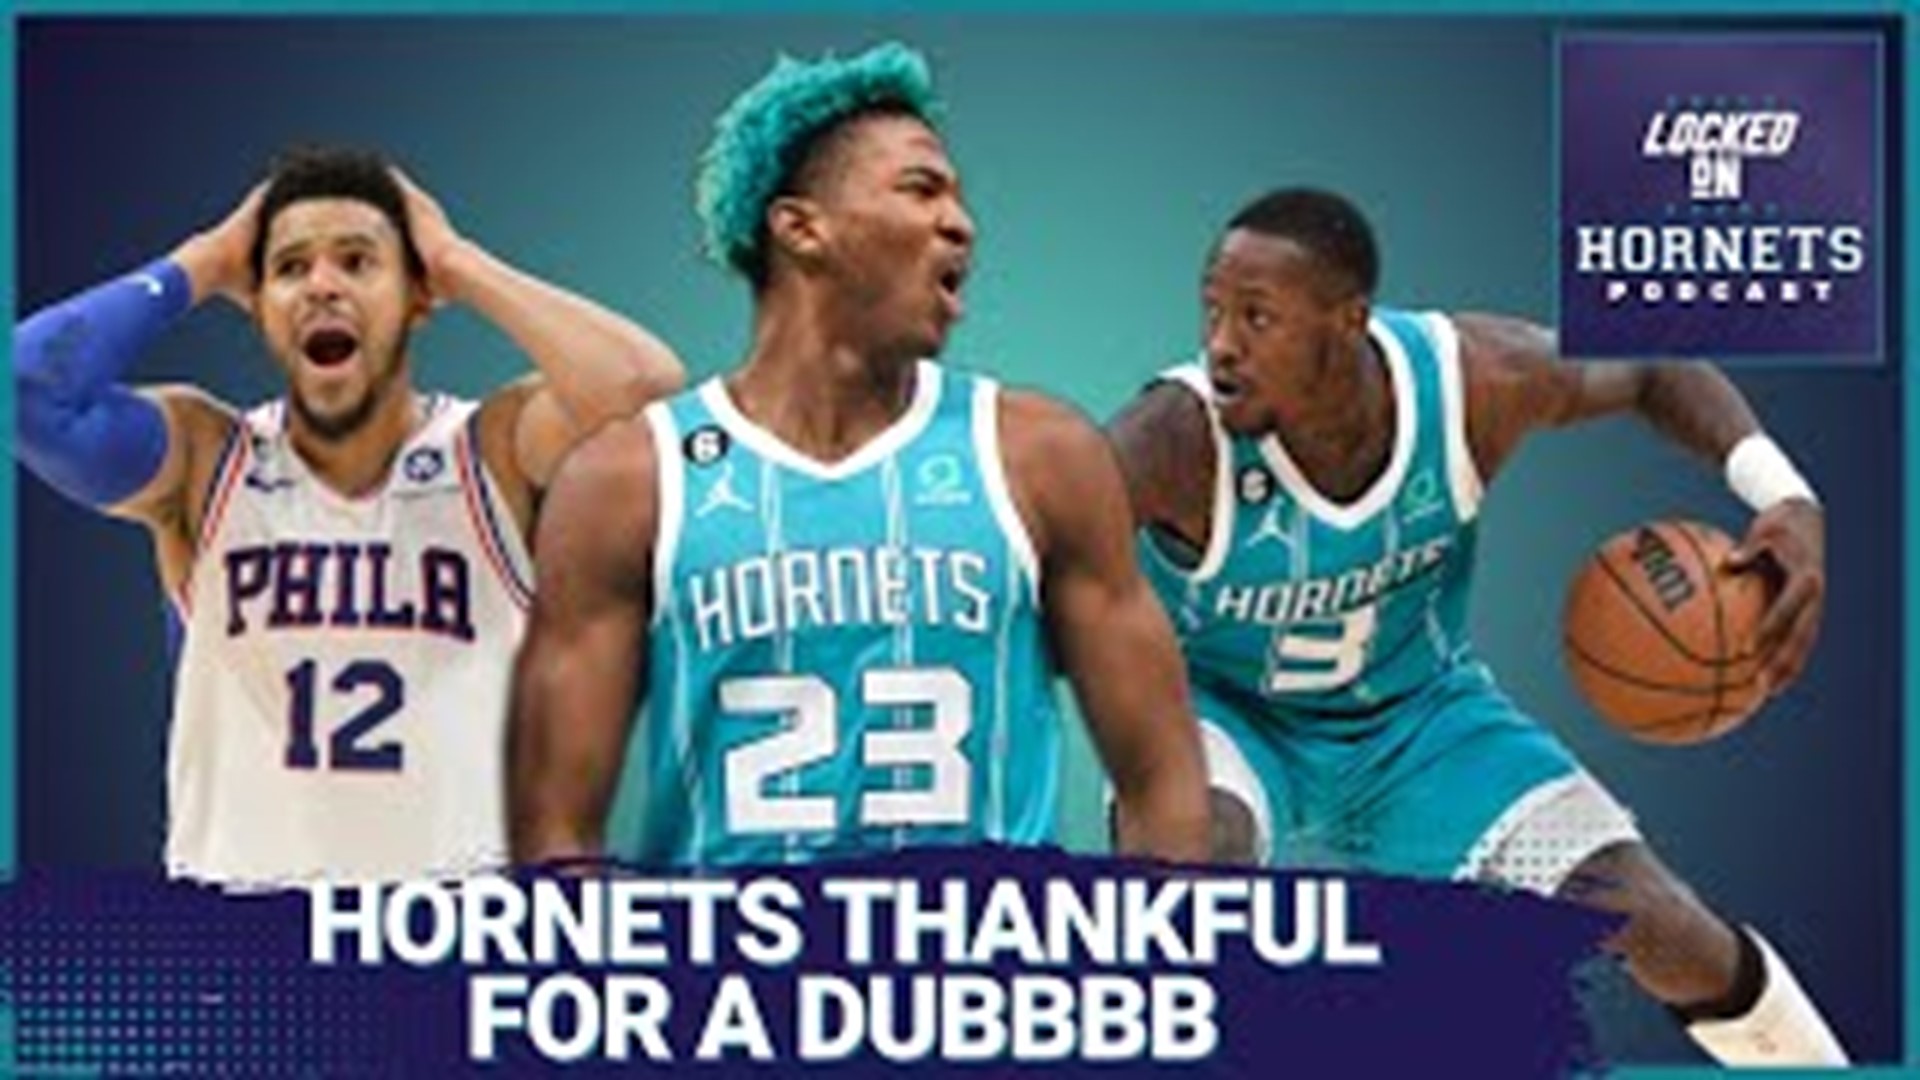 The Hornets are extra thankful after picking up a win over the 76ers on Thanksgiving Eve.  That and more on Locked On Hornets